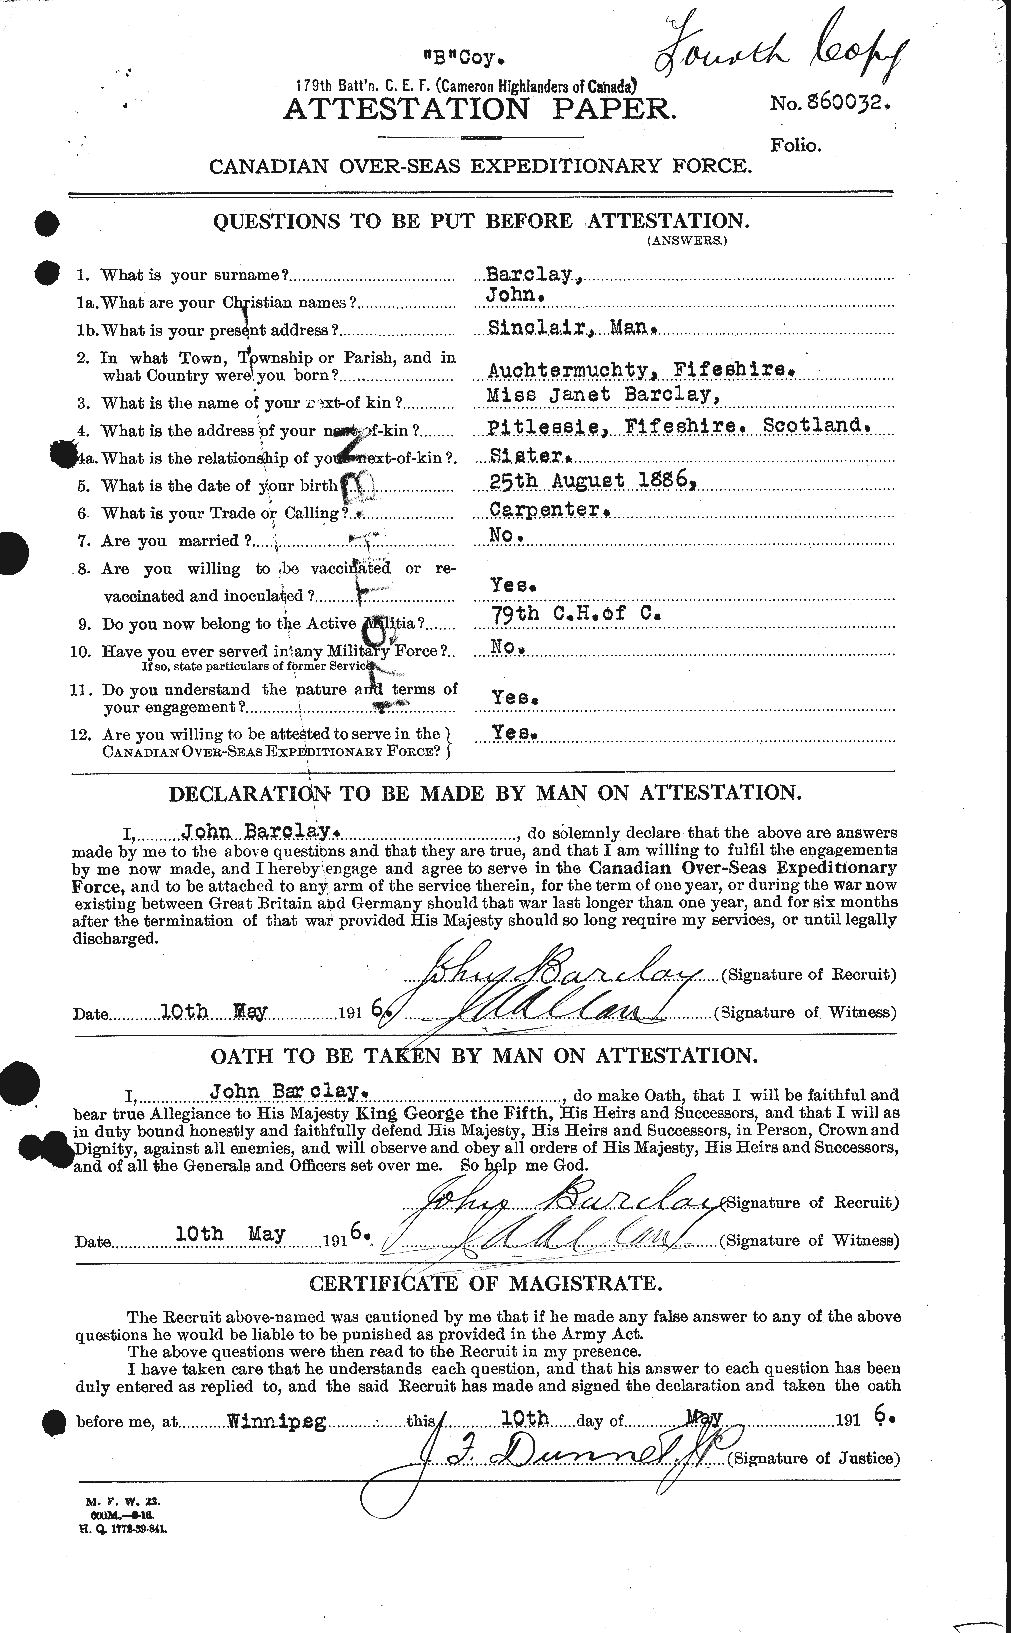 Personnel Records of the First World War - CEF 220901a